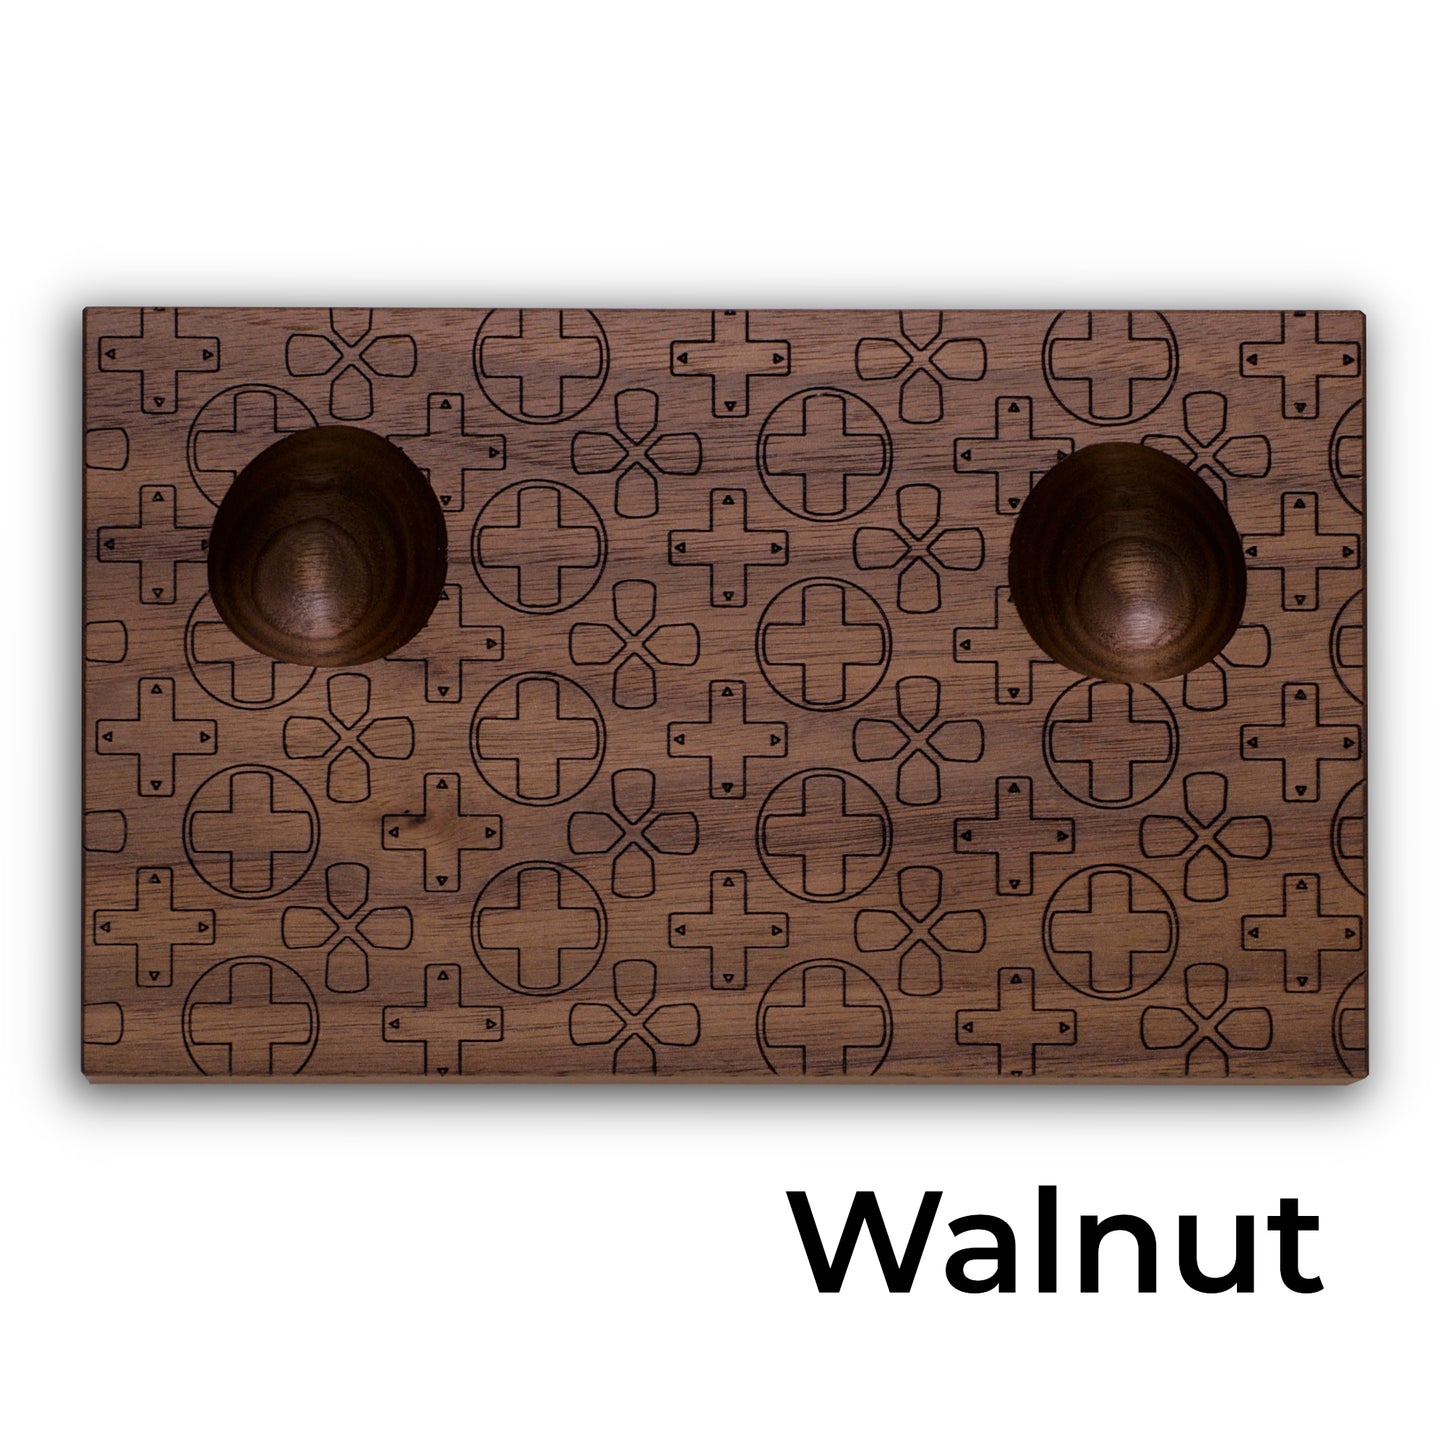 Wooden stand with d-pad design in walnut for Playstation 4 dualshock controller